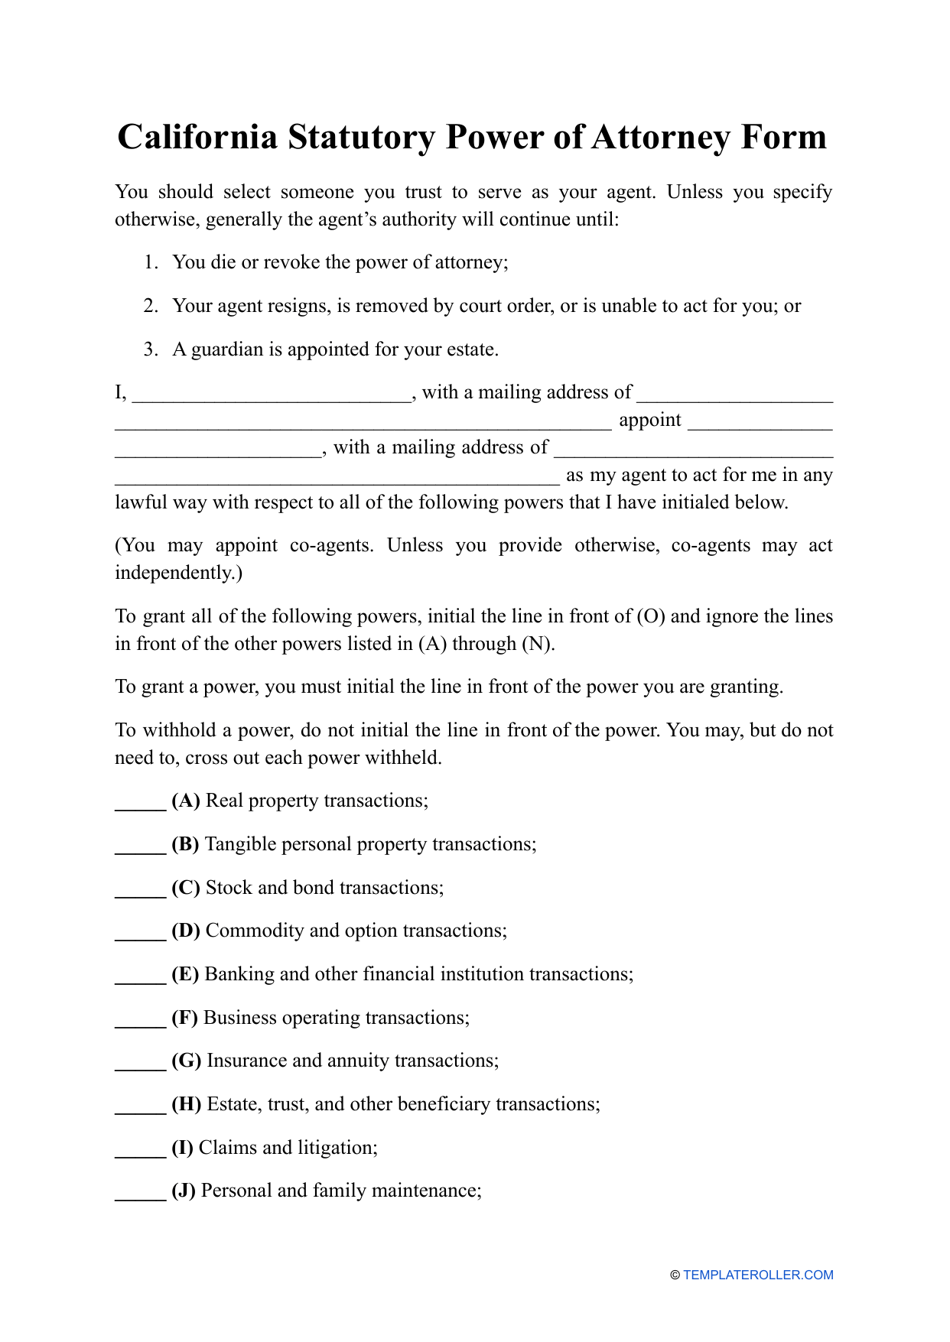 Statutory Power of Attorney Form - California, Page 1